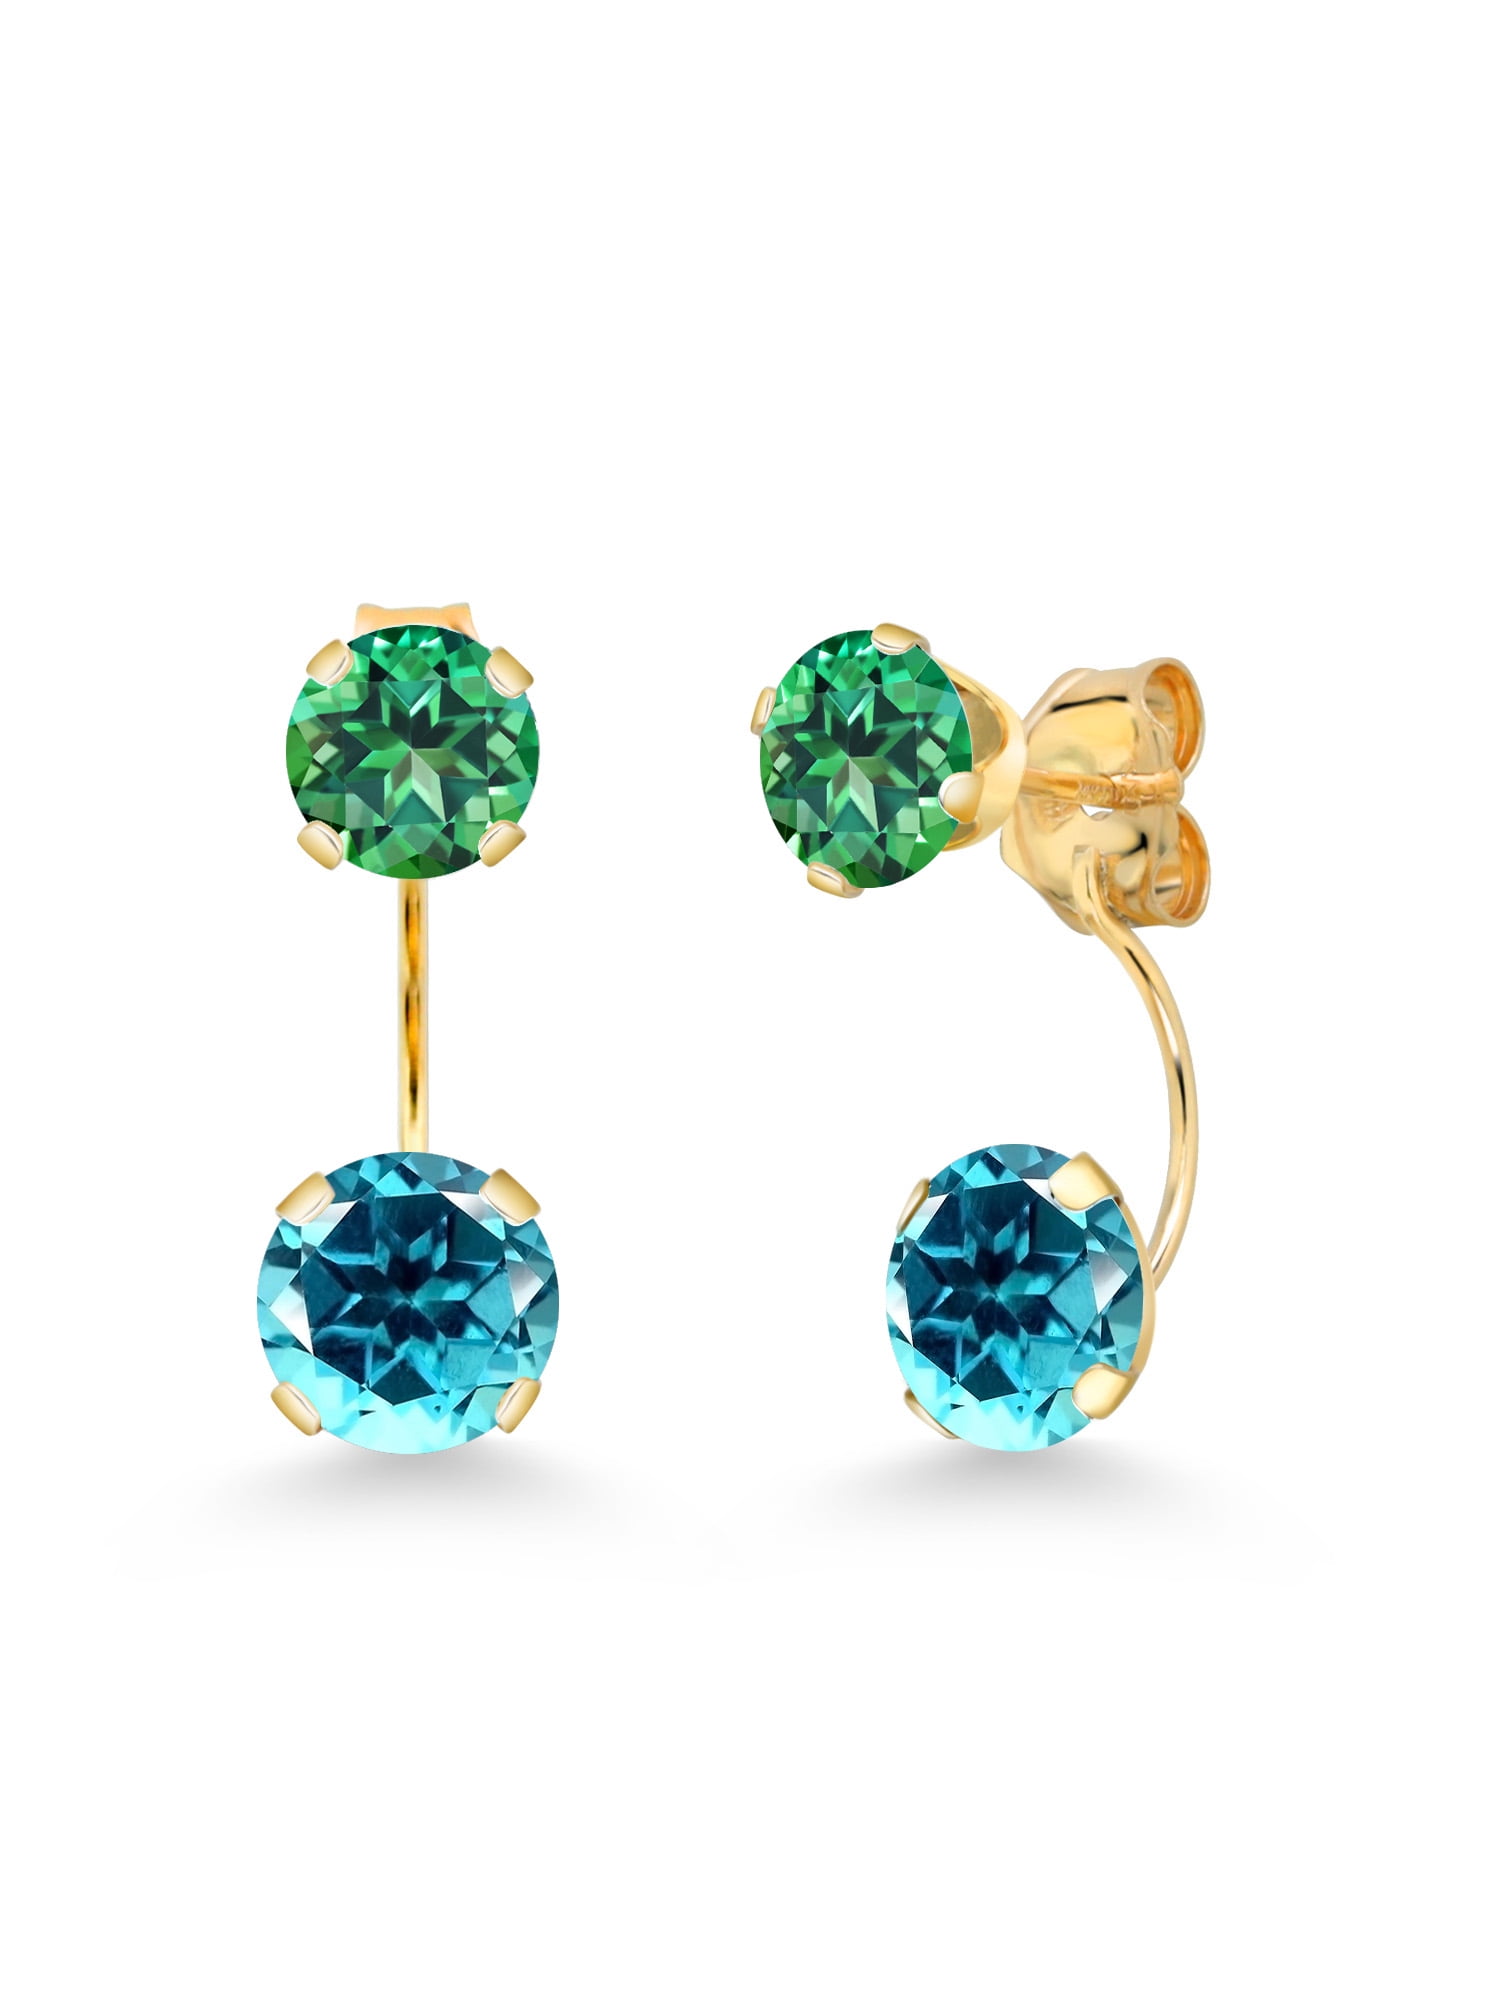 Gem Stone King 18K Yellow Gold Plated Silver Stud Earrings Set with Paraiba Topaz